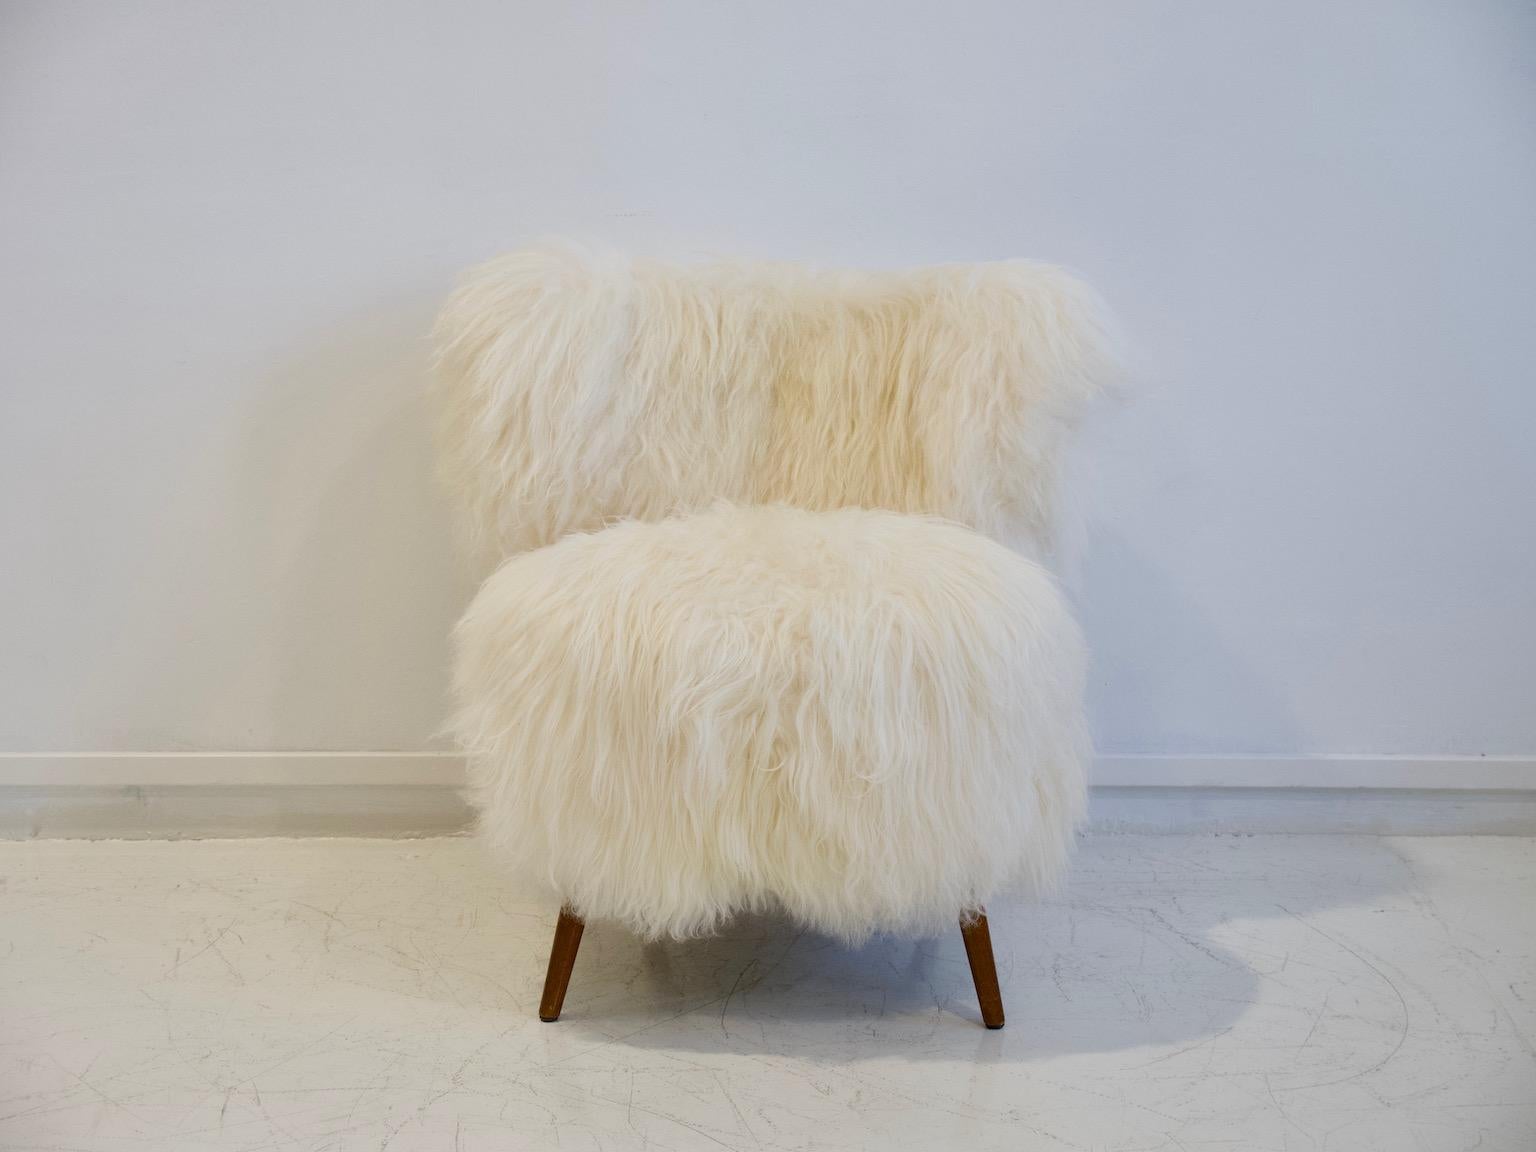 Lounge chair made in Denmark, circa 1950. Later upholstered with long-haired Icelandic lambskin. Legs made of lacquered wood.